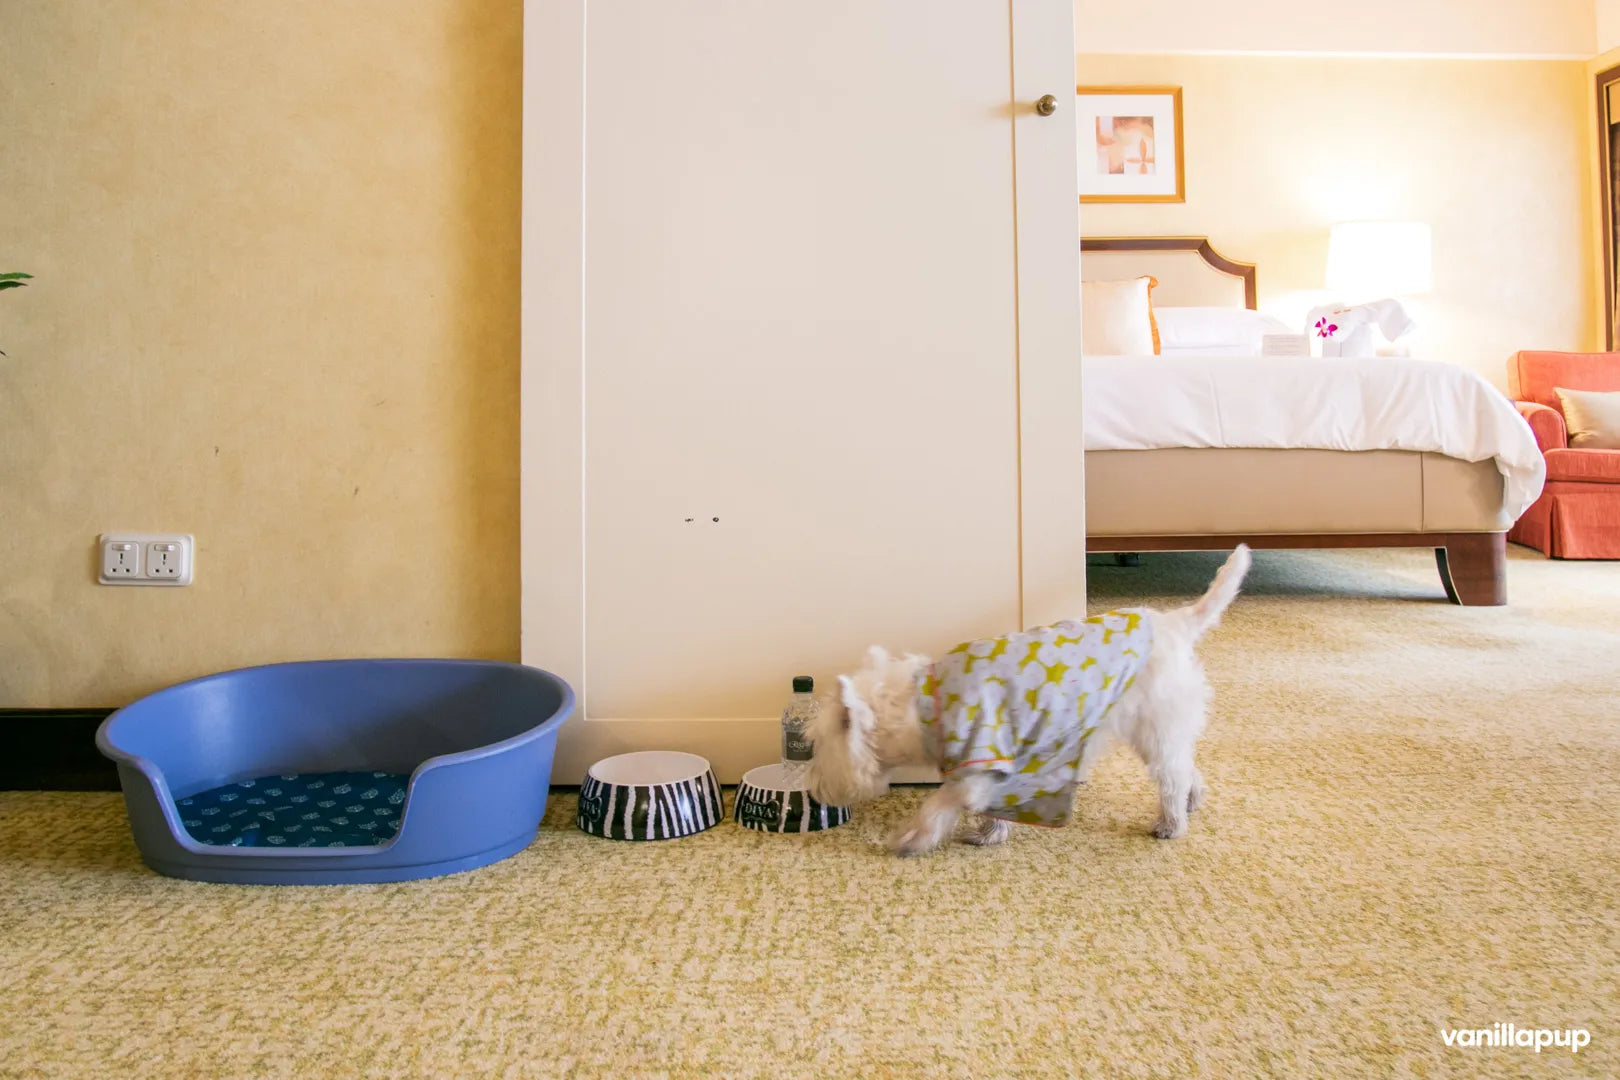 22 Dog-friendly Hotels, Serviced Apartments, and Chalets for Staycations in Singapore